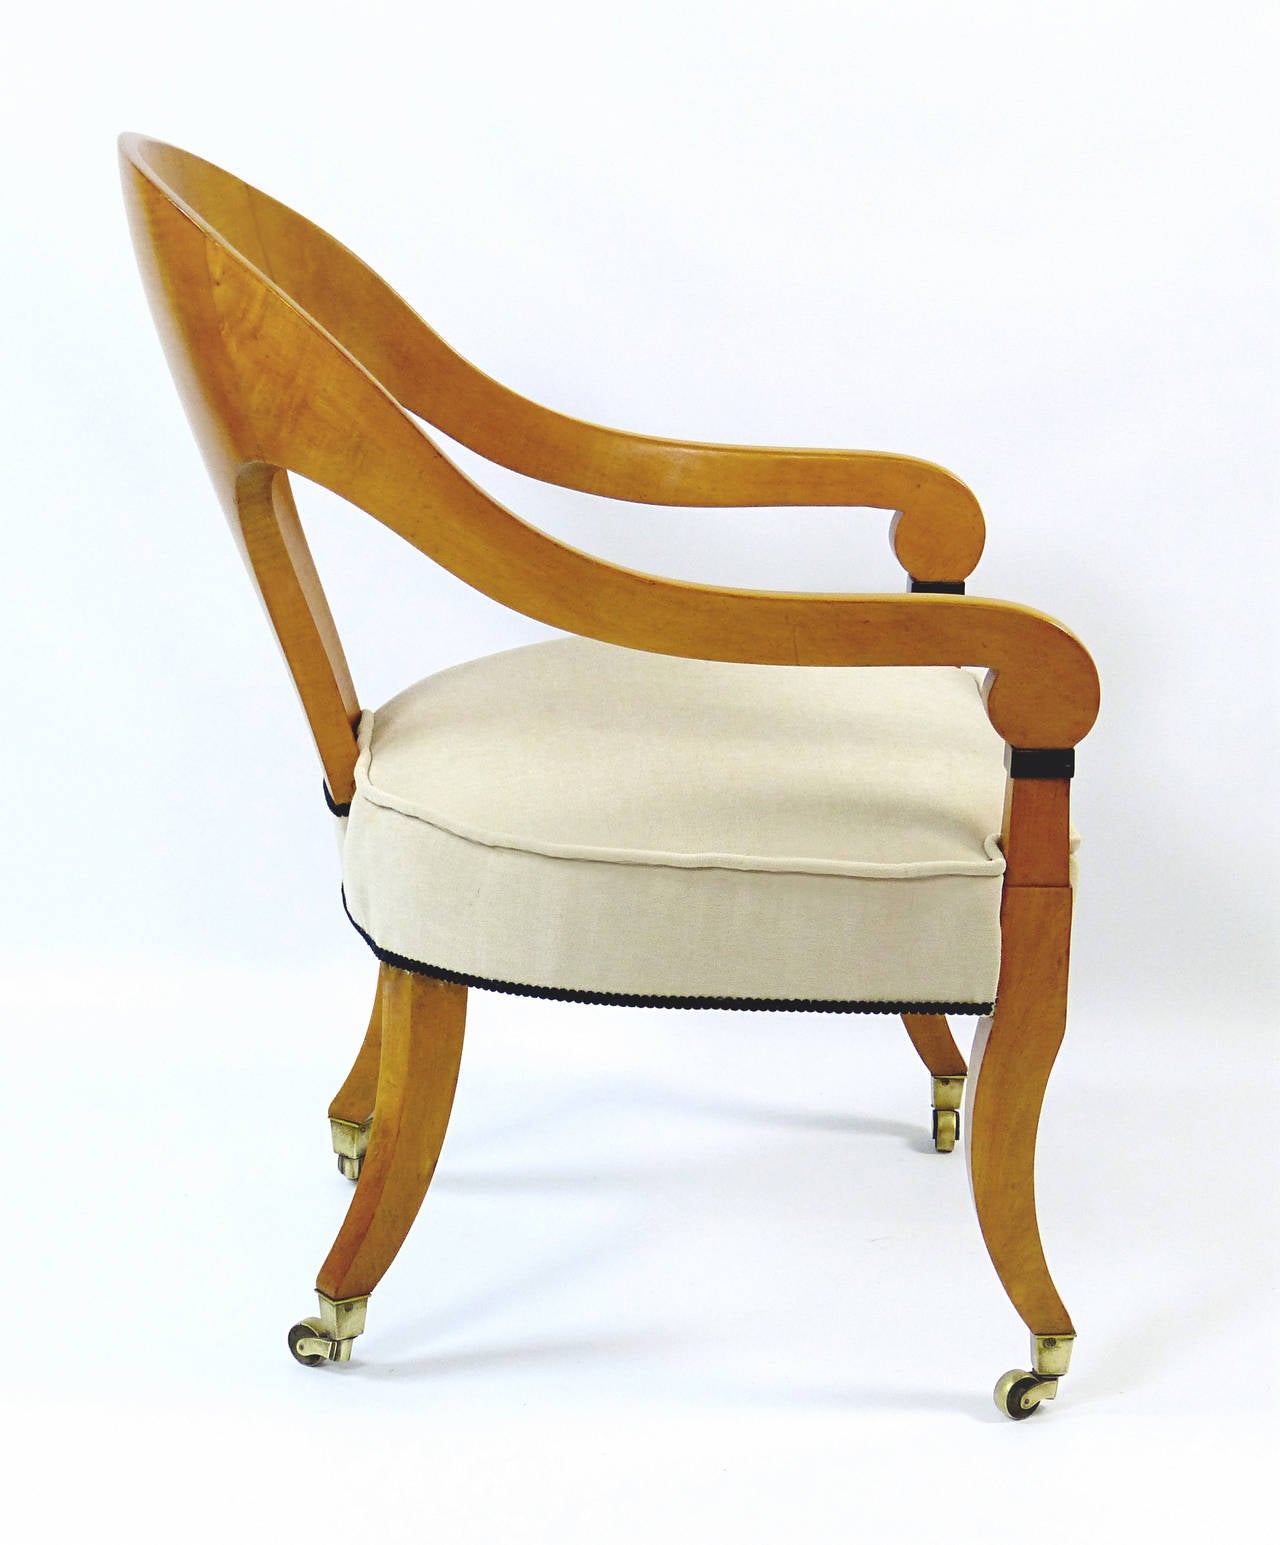 Outstanding armchair of the first Biedermeier period of German origin, created out of solid figured maple with beautifully curved back and arms ending in ebonized highlights and with sabre shaped legs terminating in brass casters. This is certainly